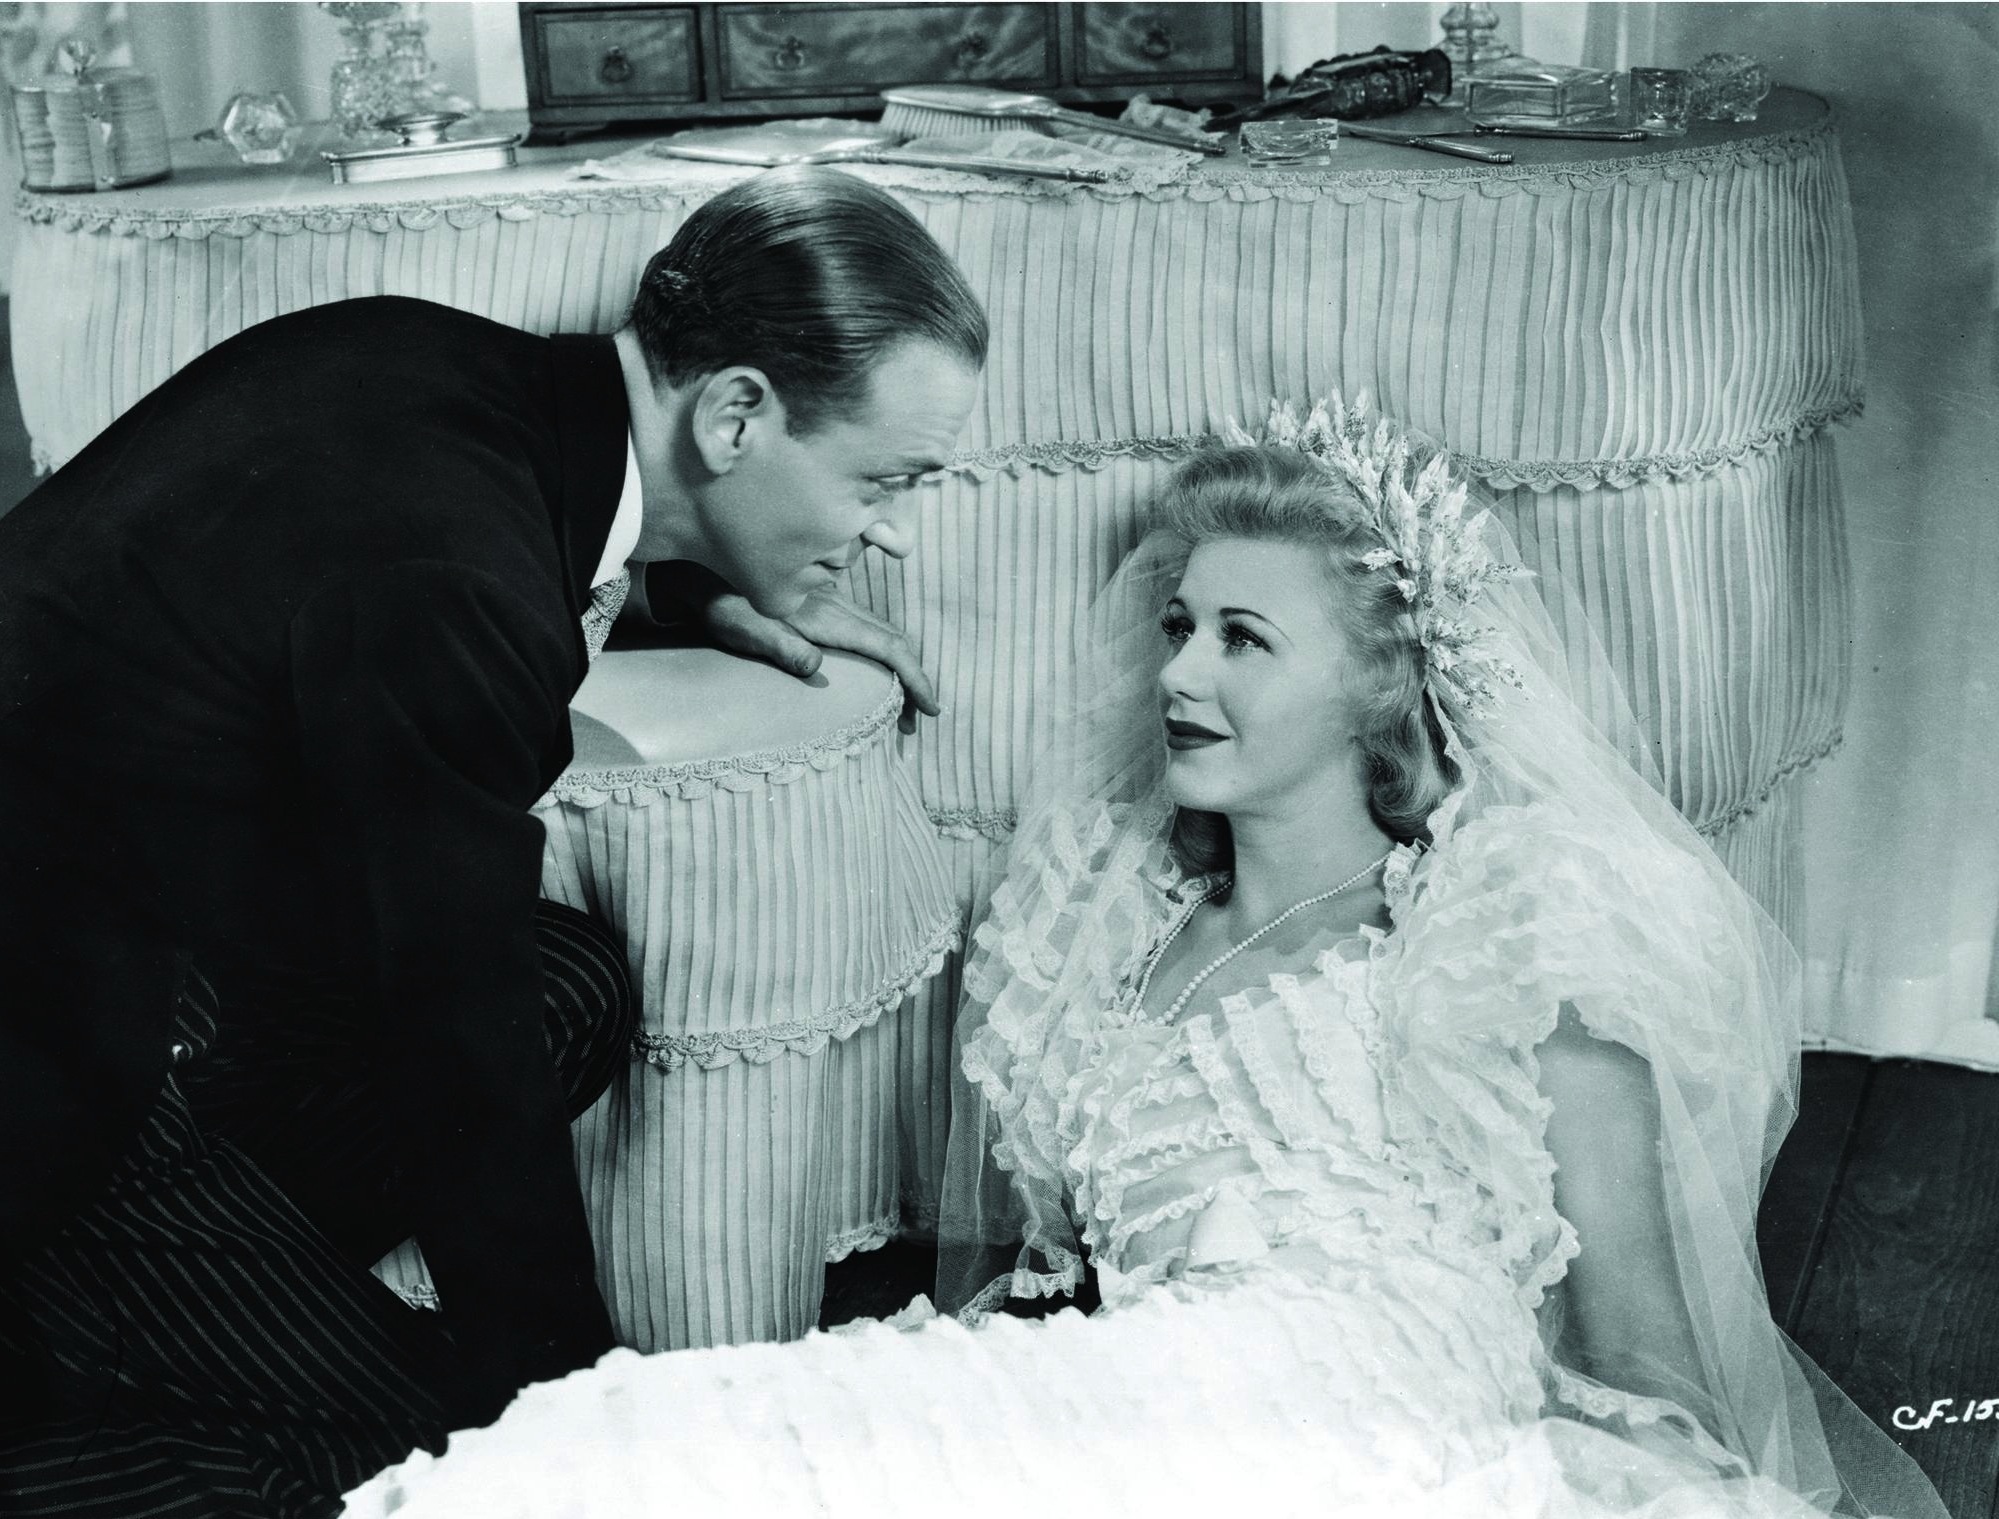 Still of Fred Astaire and Ginger Rogers in Carefree (1938)